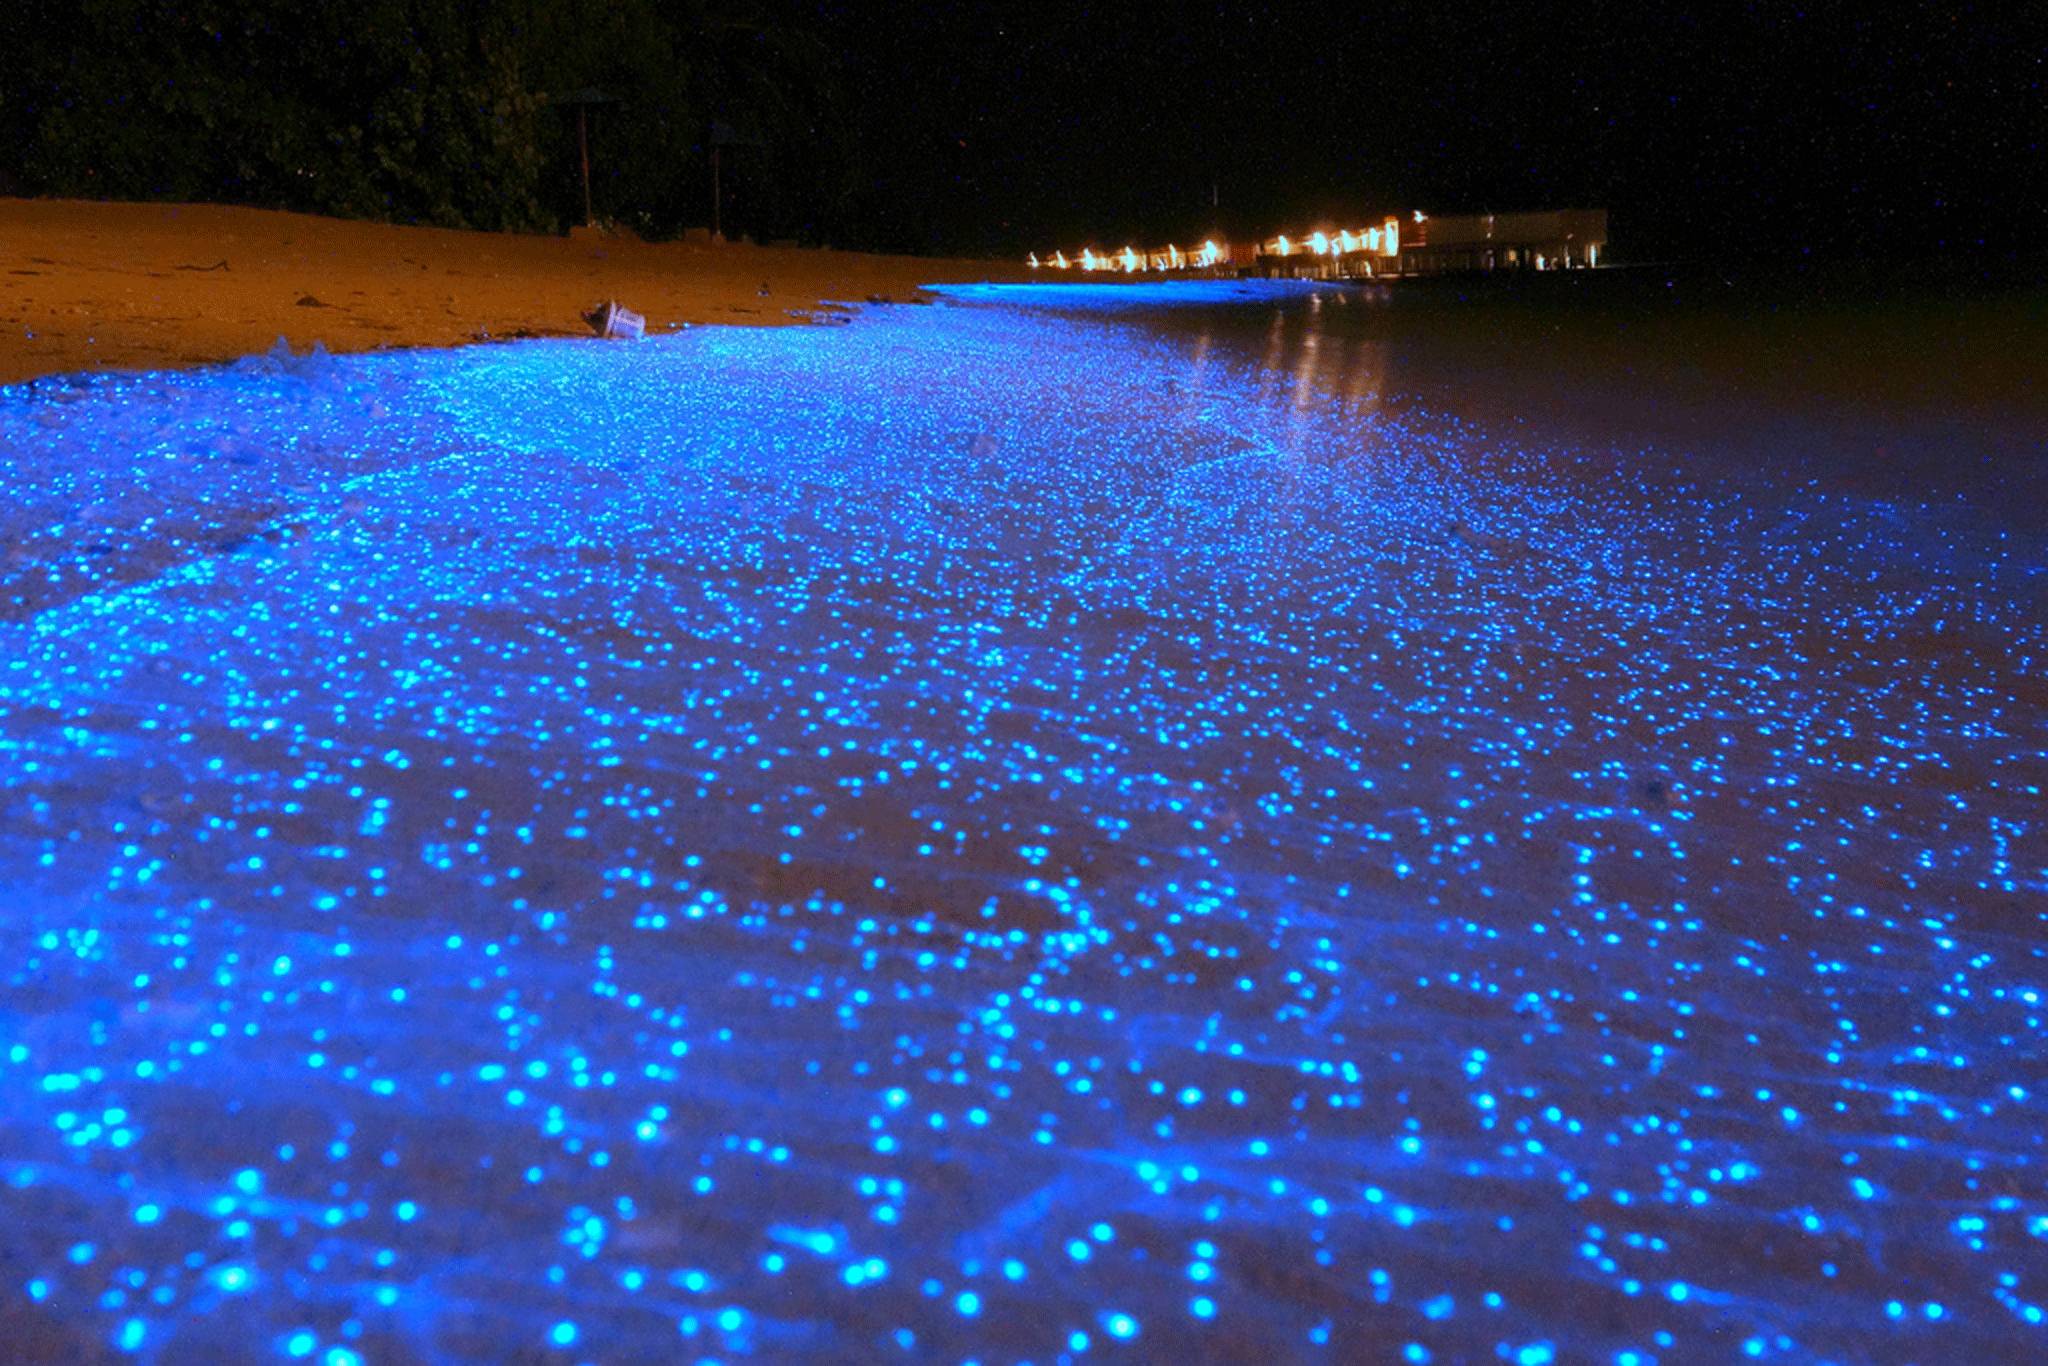 Bioluminescent phytoplankton washes up on Maldives beach (Picture: Will Ho)